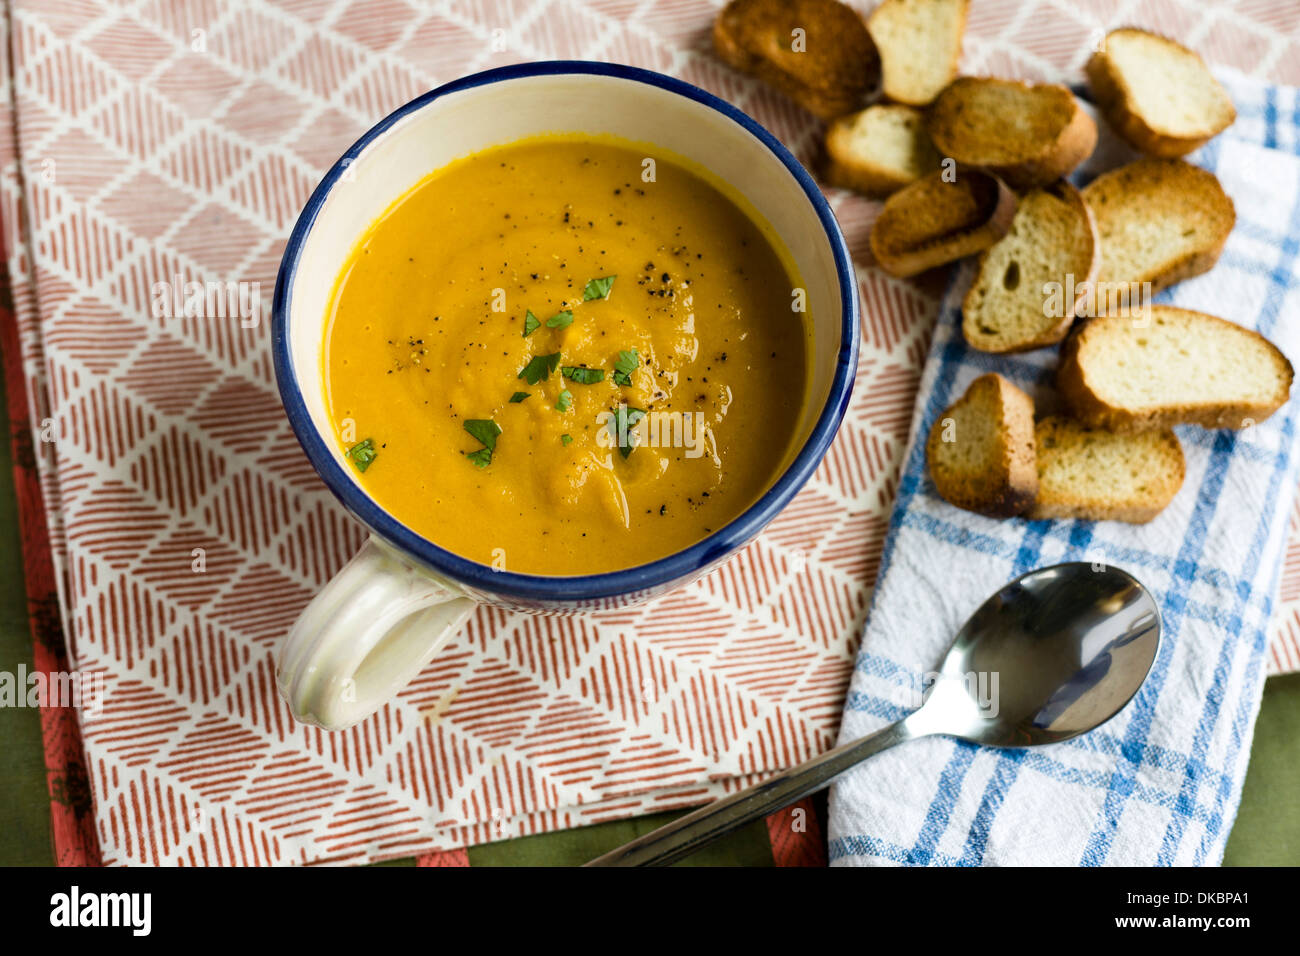 Top down view of a large mug of carrot and coriander soup, with spoon and croûton. Stock Photo